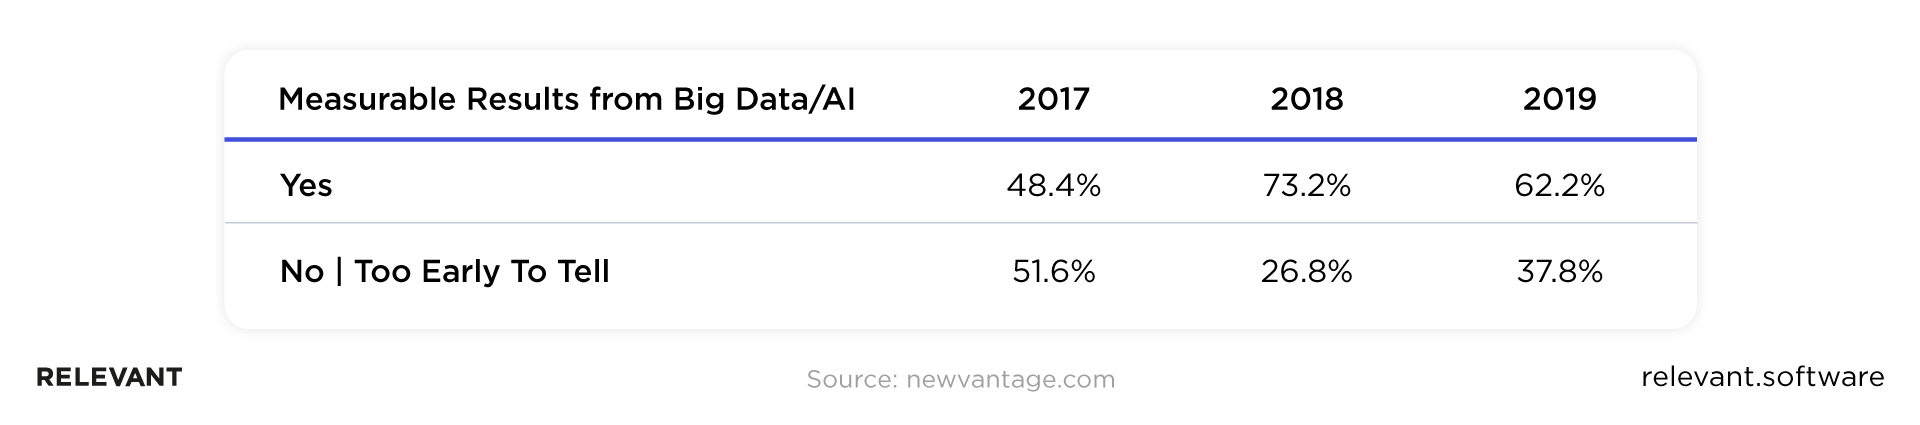 measurable results from big data/AI